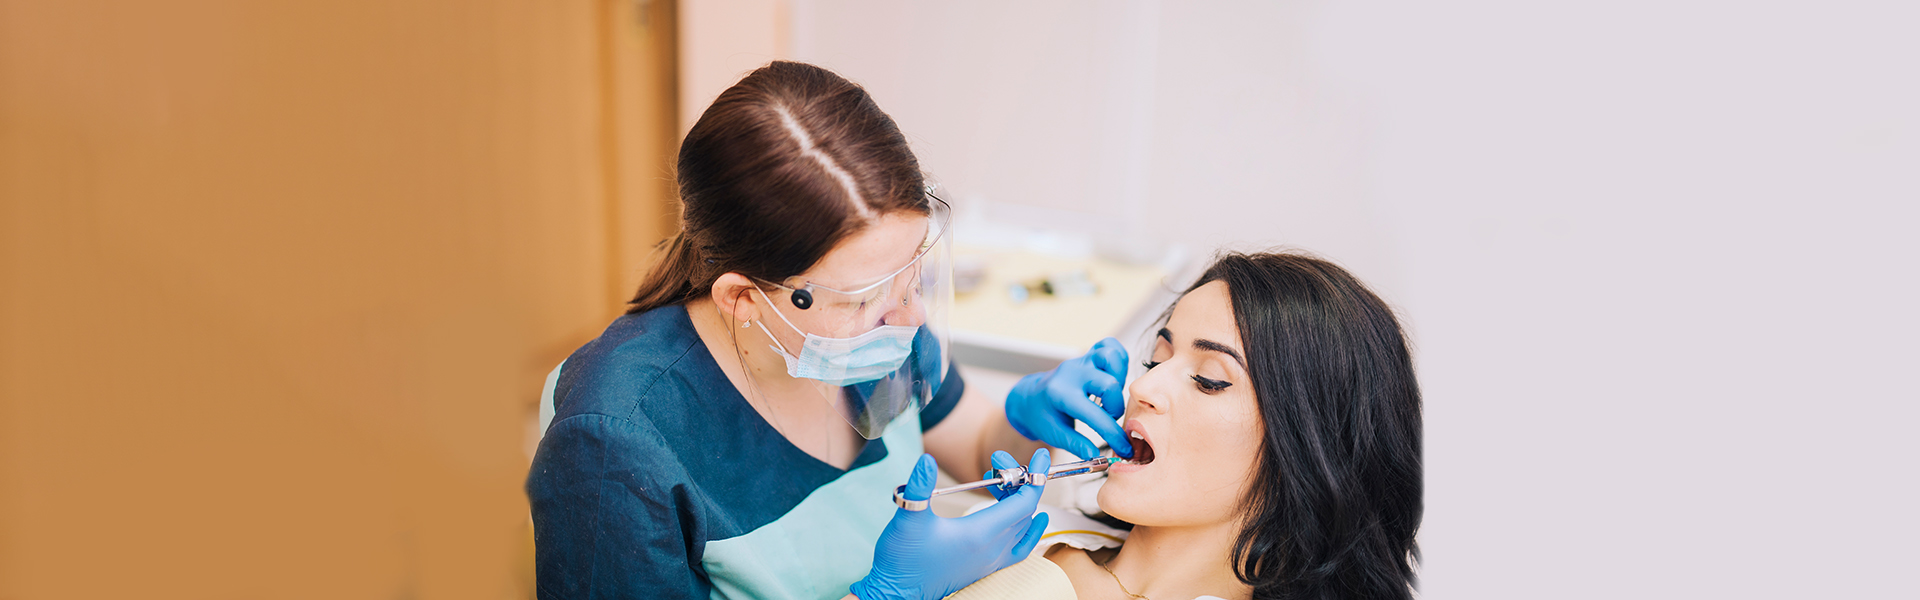 What Is Waterlase Laser and Why Is It Used in Dentistry?